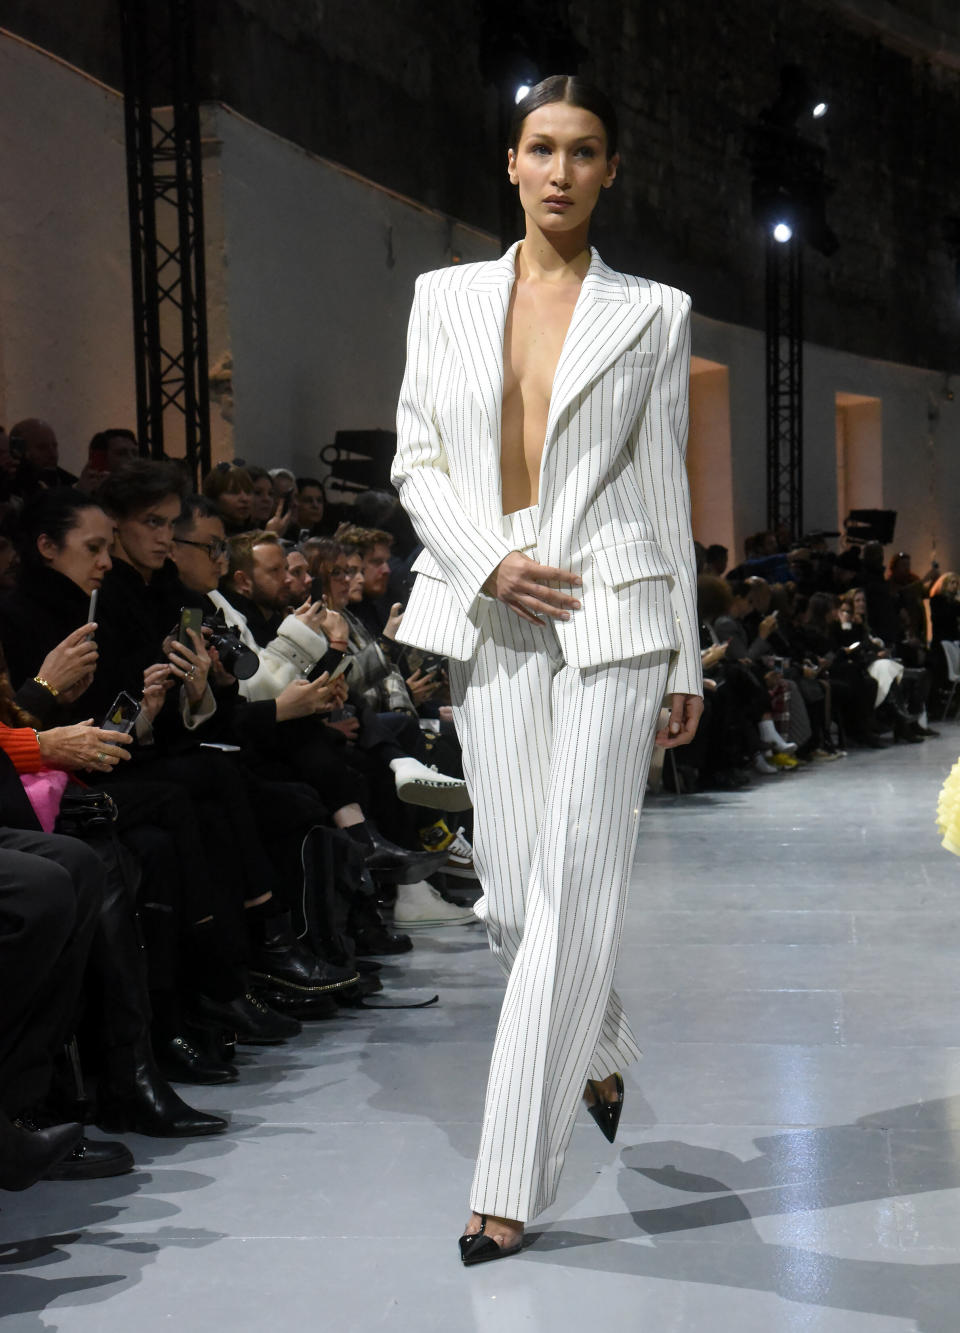 A model walks the runway at the Alexandre Vauthier haute couture spring/summer 2020 show on Jan. 21.